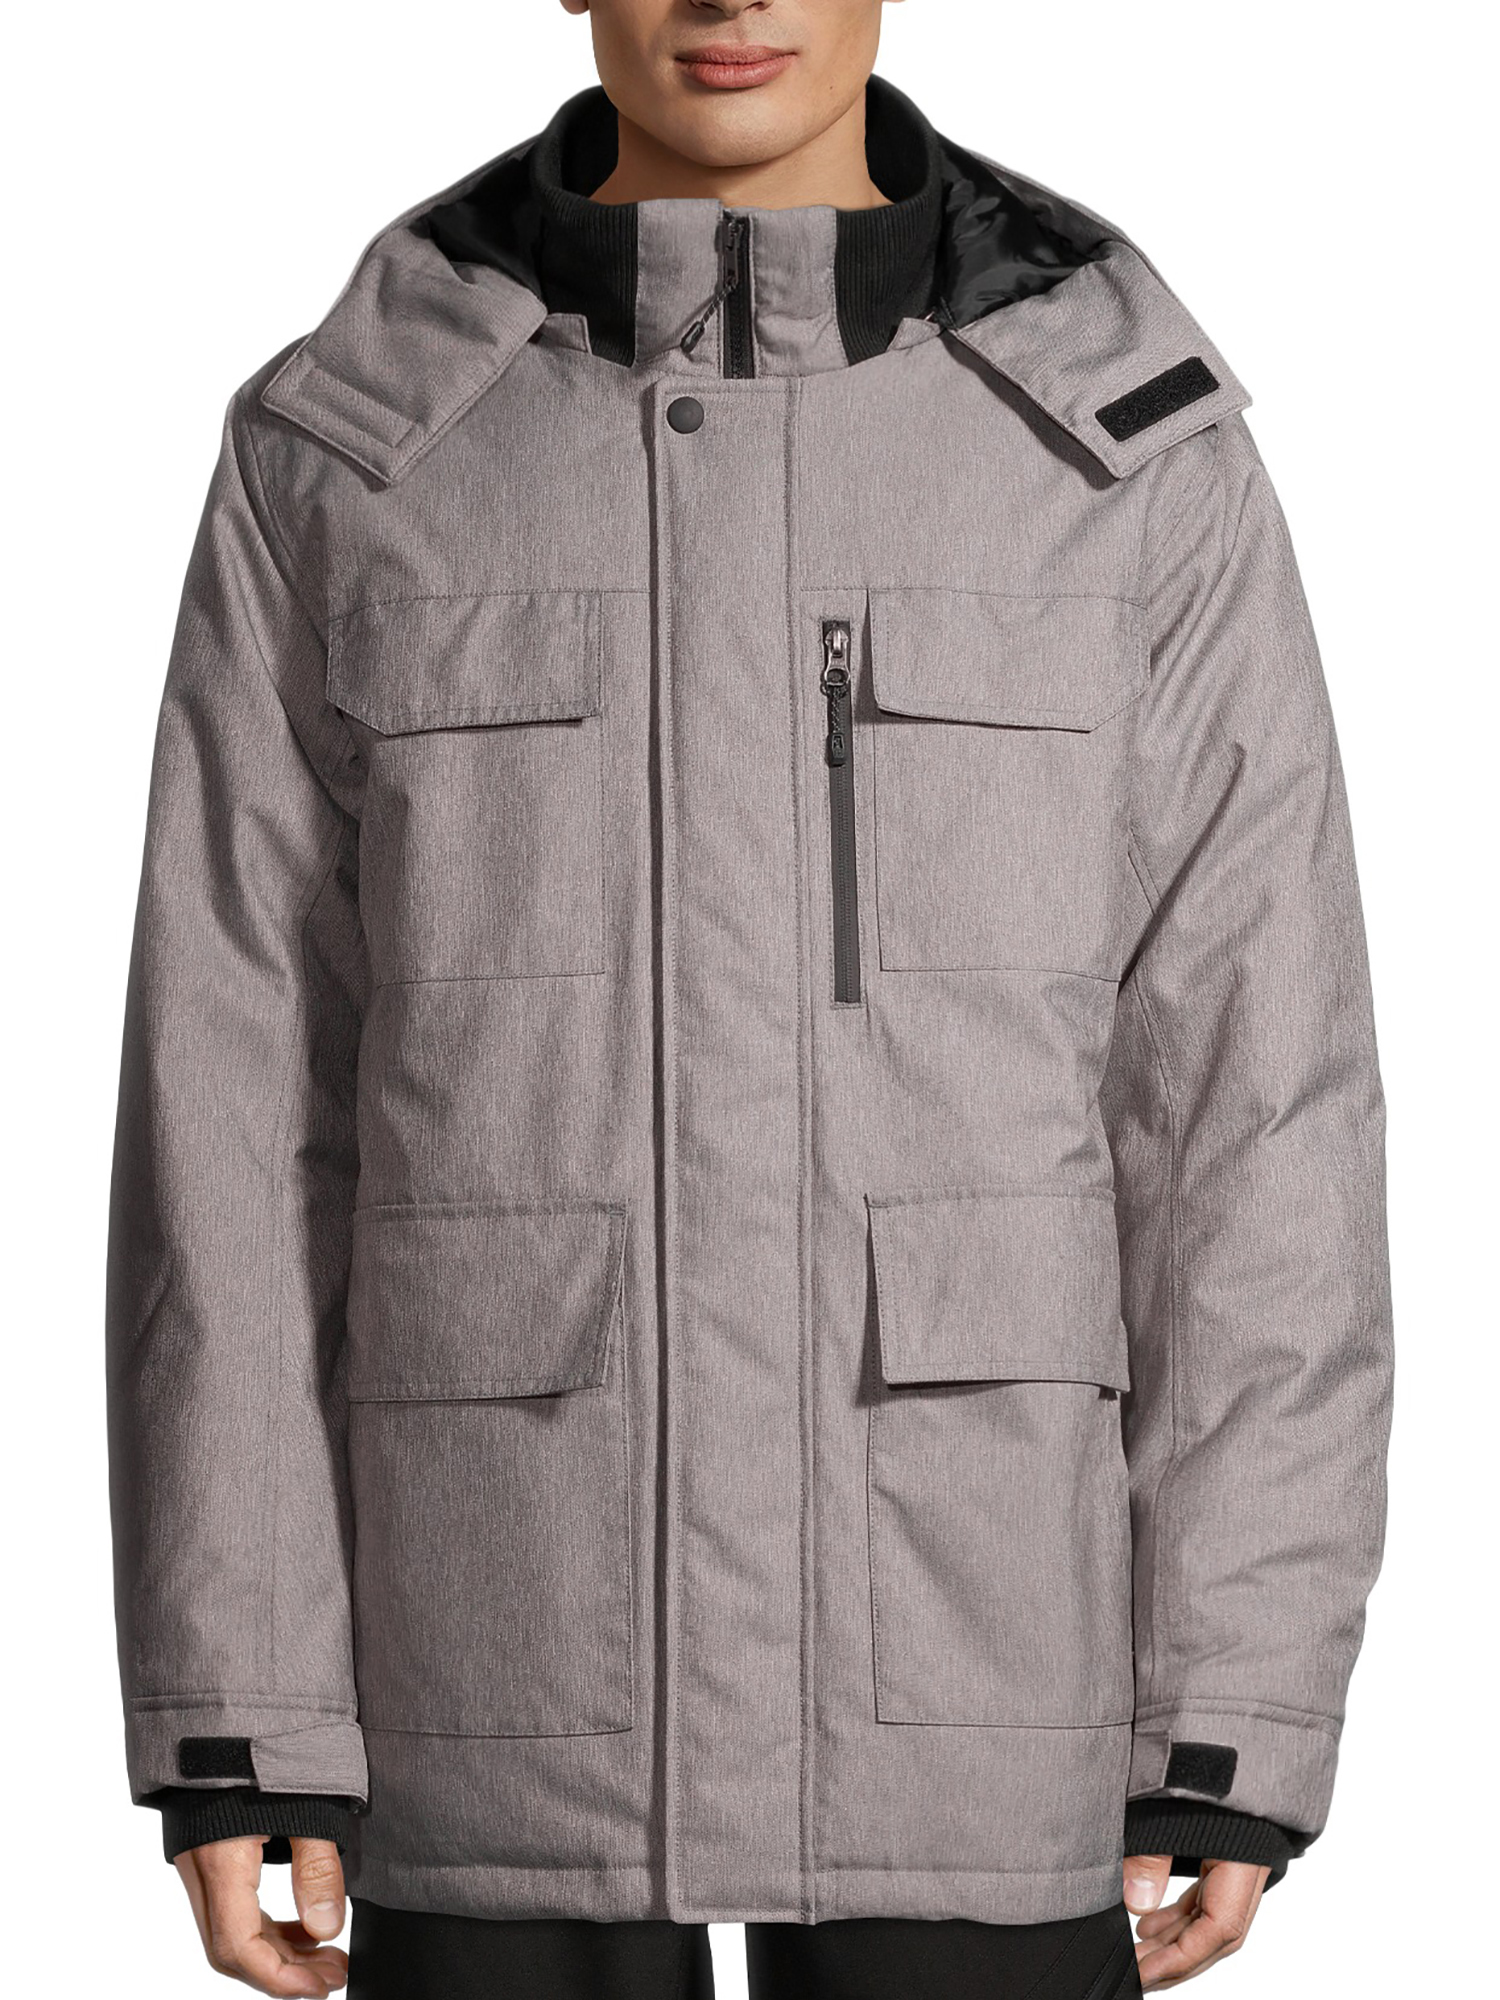 SwissTech Men's and Big Men's Parka Jacket, Up to Size 5XL - image 1 of 6